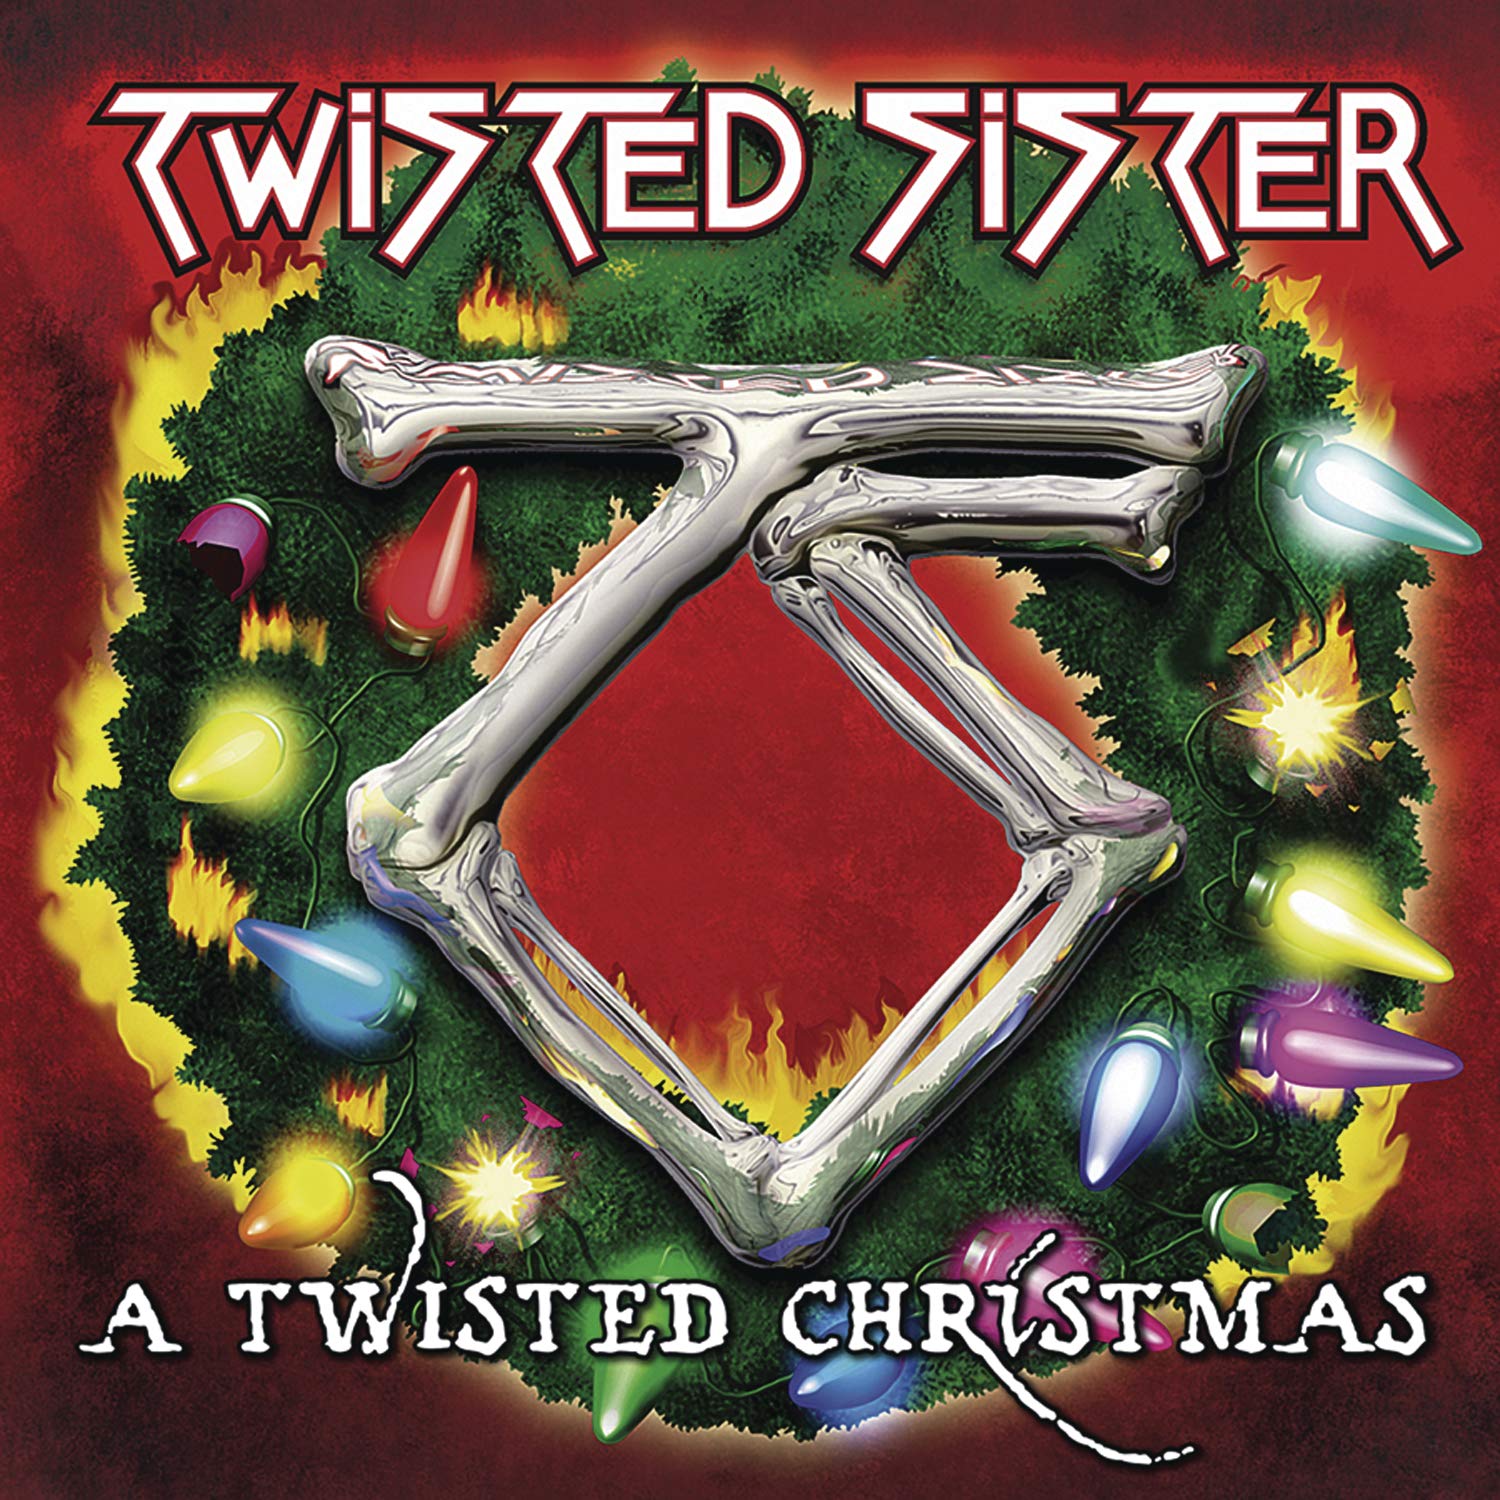 Twisted Sister A Twisted Christmas CD